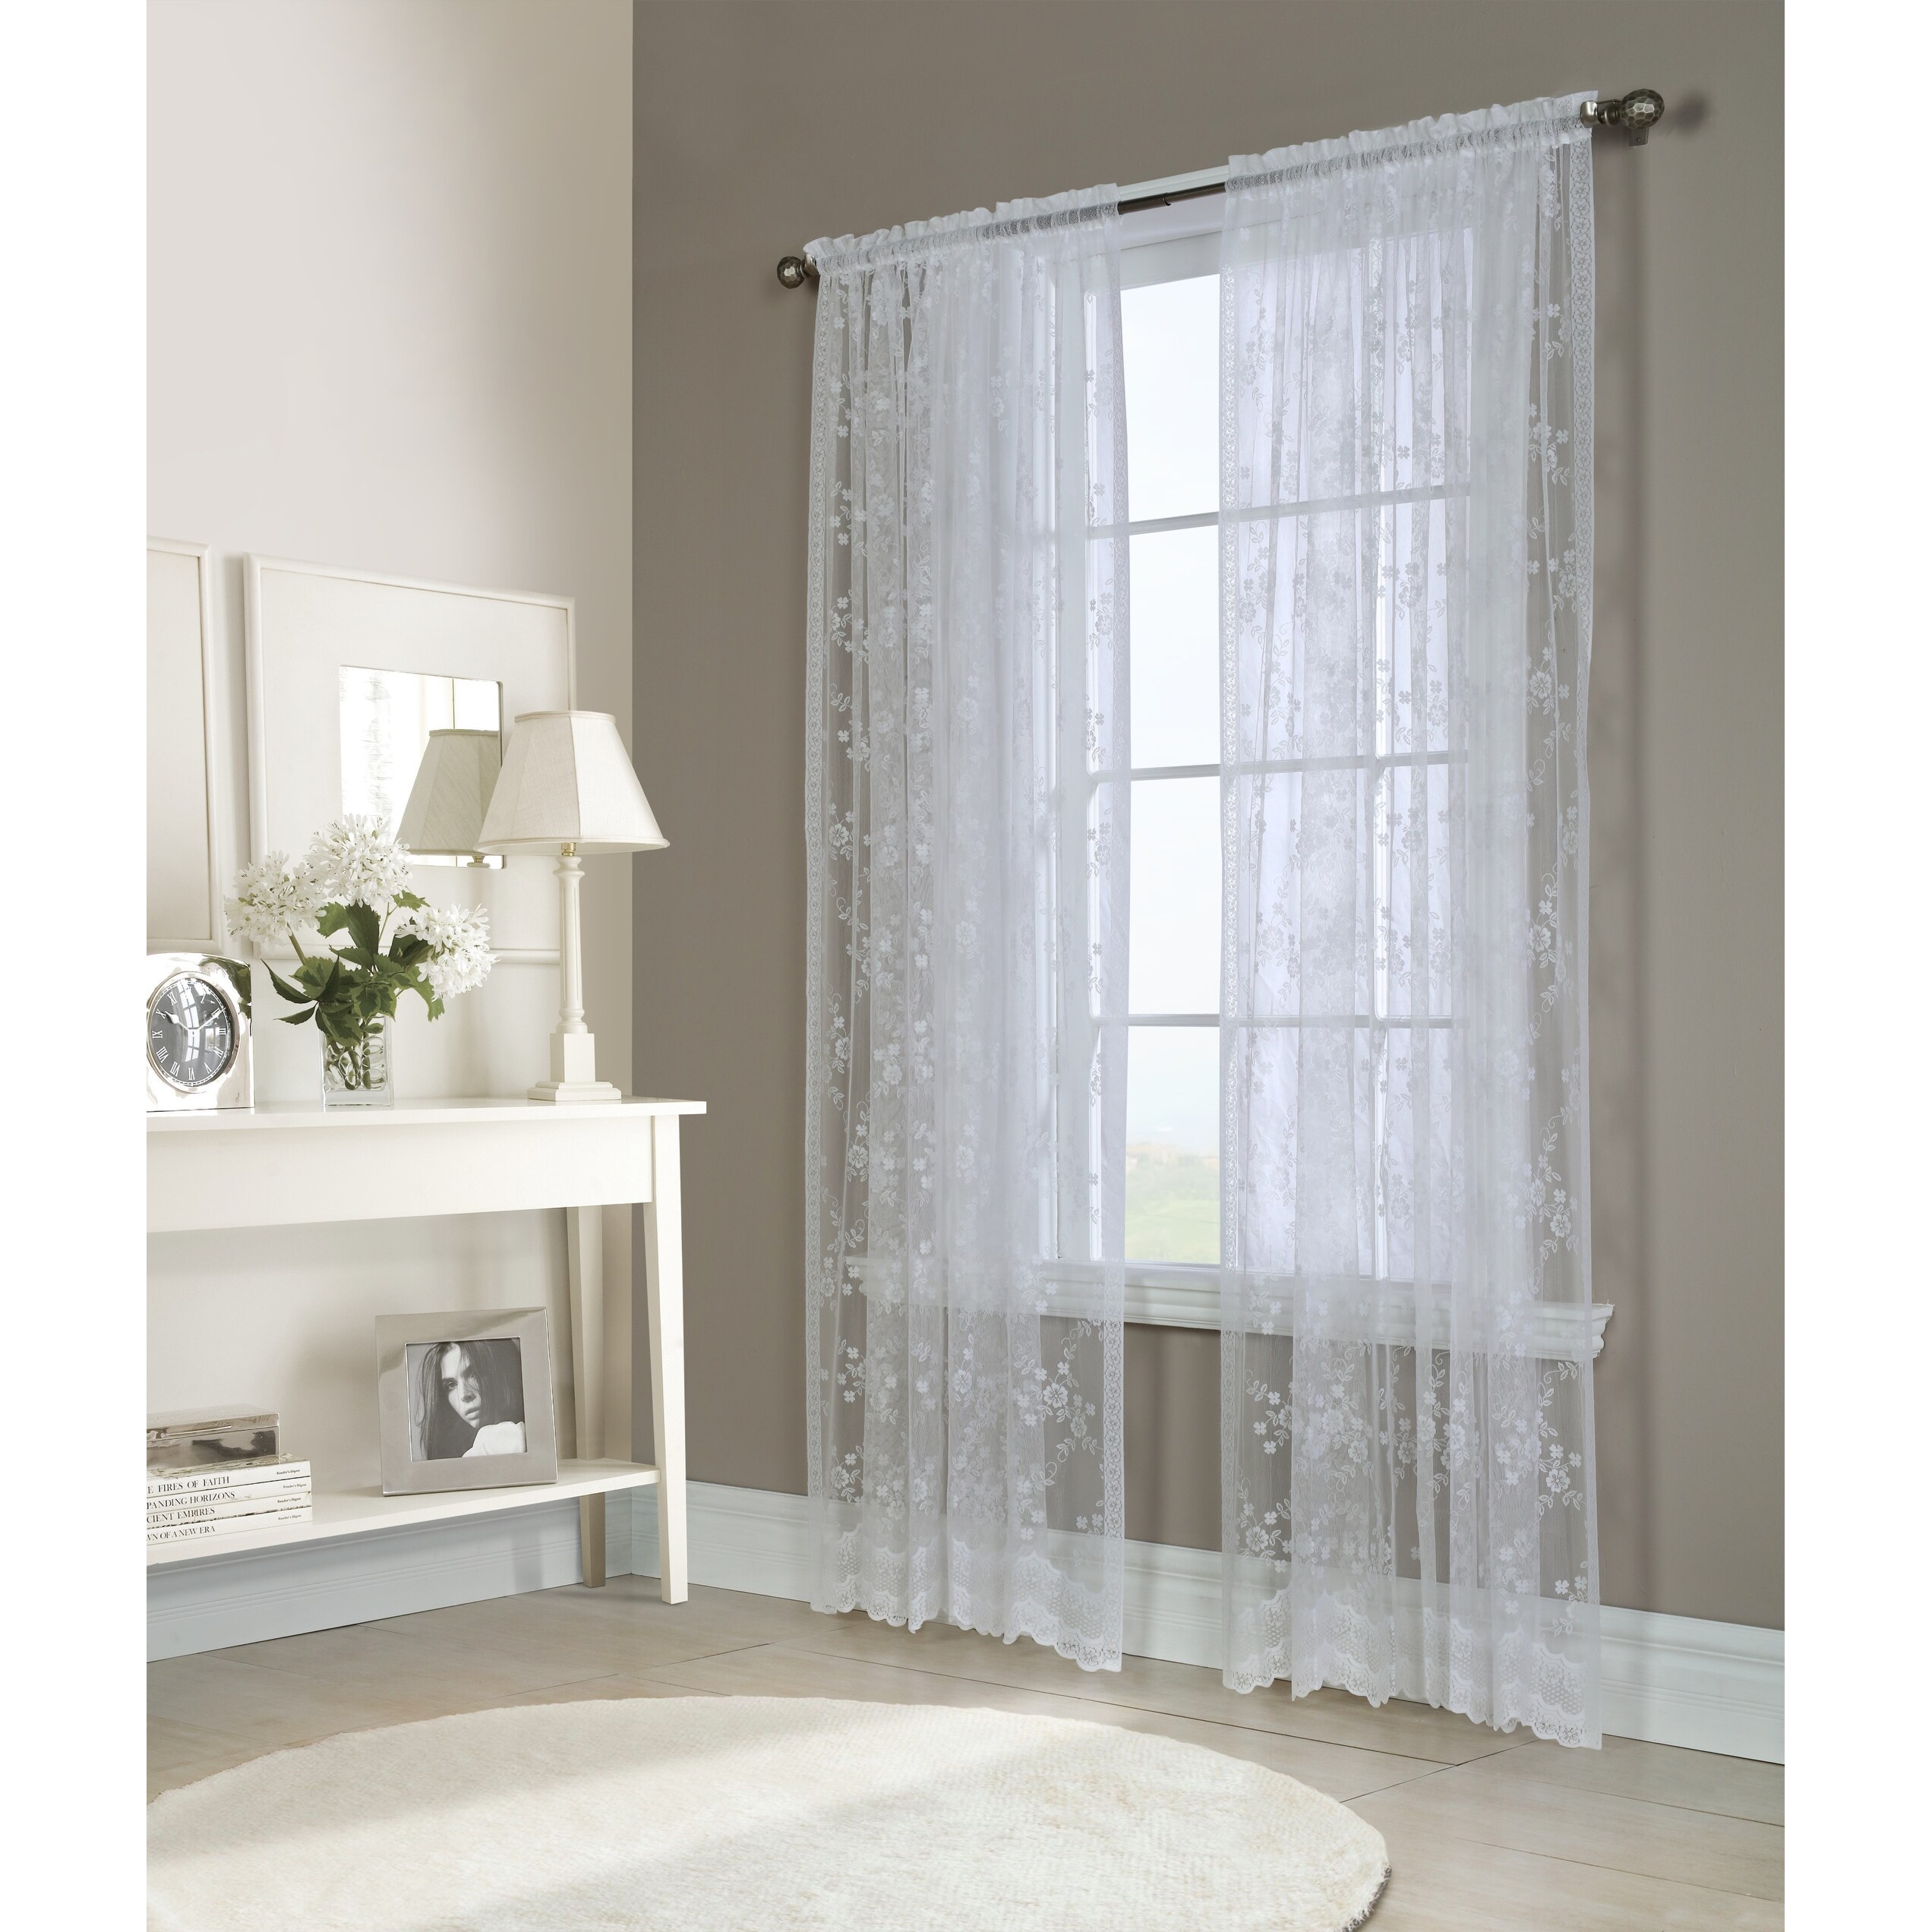 VALENCIA GREAT VALUE LOUVRE BLIND STYLE WHITE LACE CURTAINS CHEAP QUALITY 